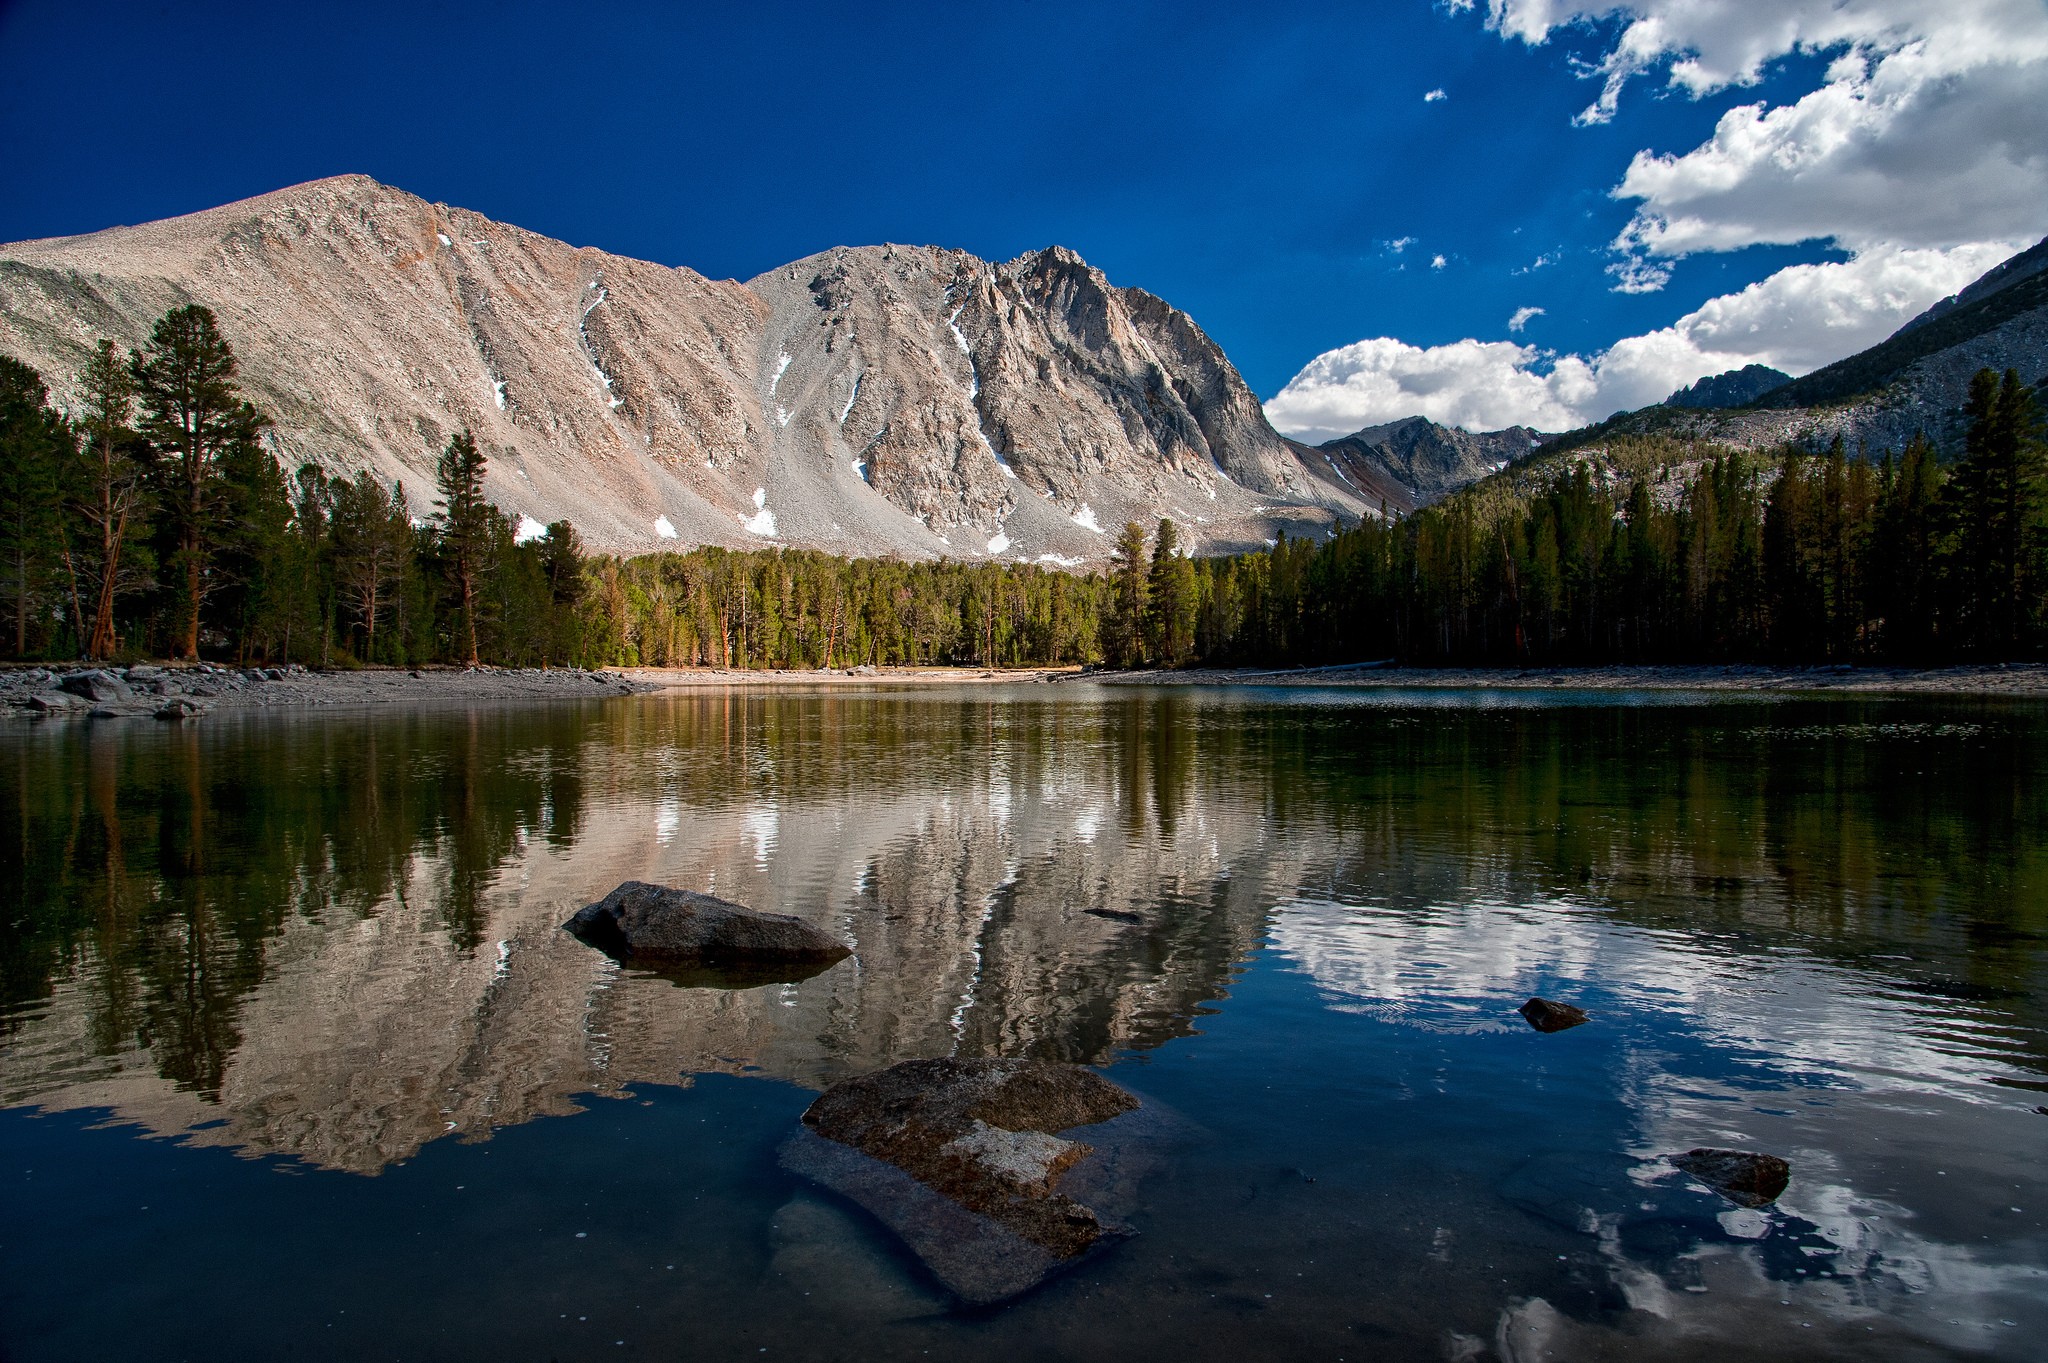 General 2048x1363 nature landscape mountains trees forest water lake clouds Sierra Nevada California USA rocks stones reflection